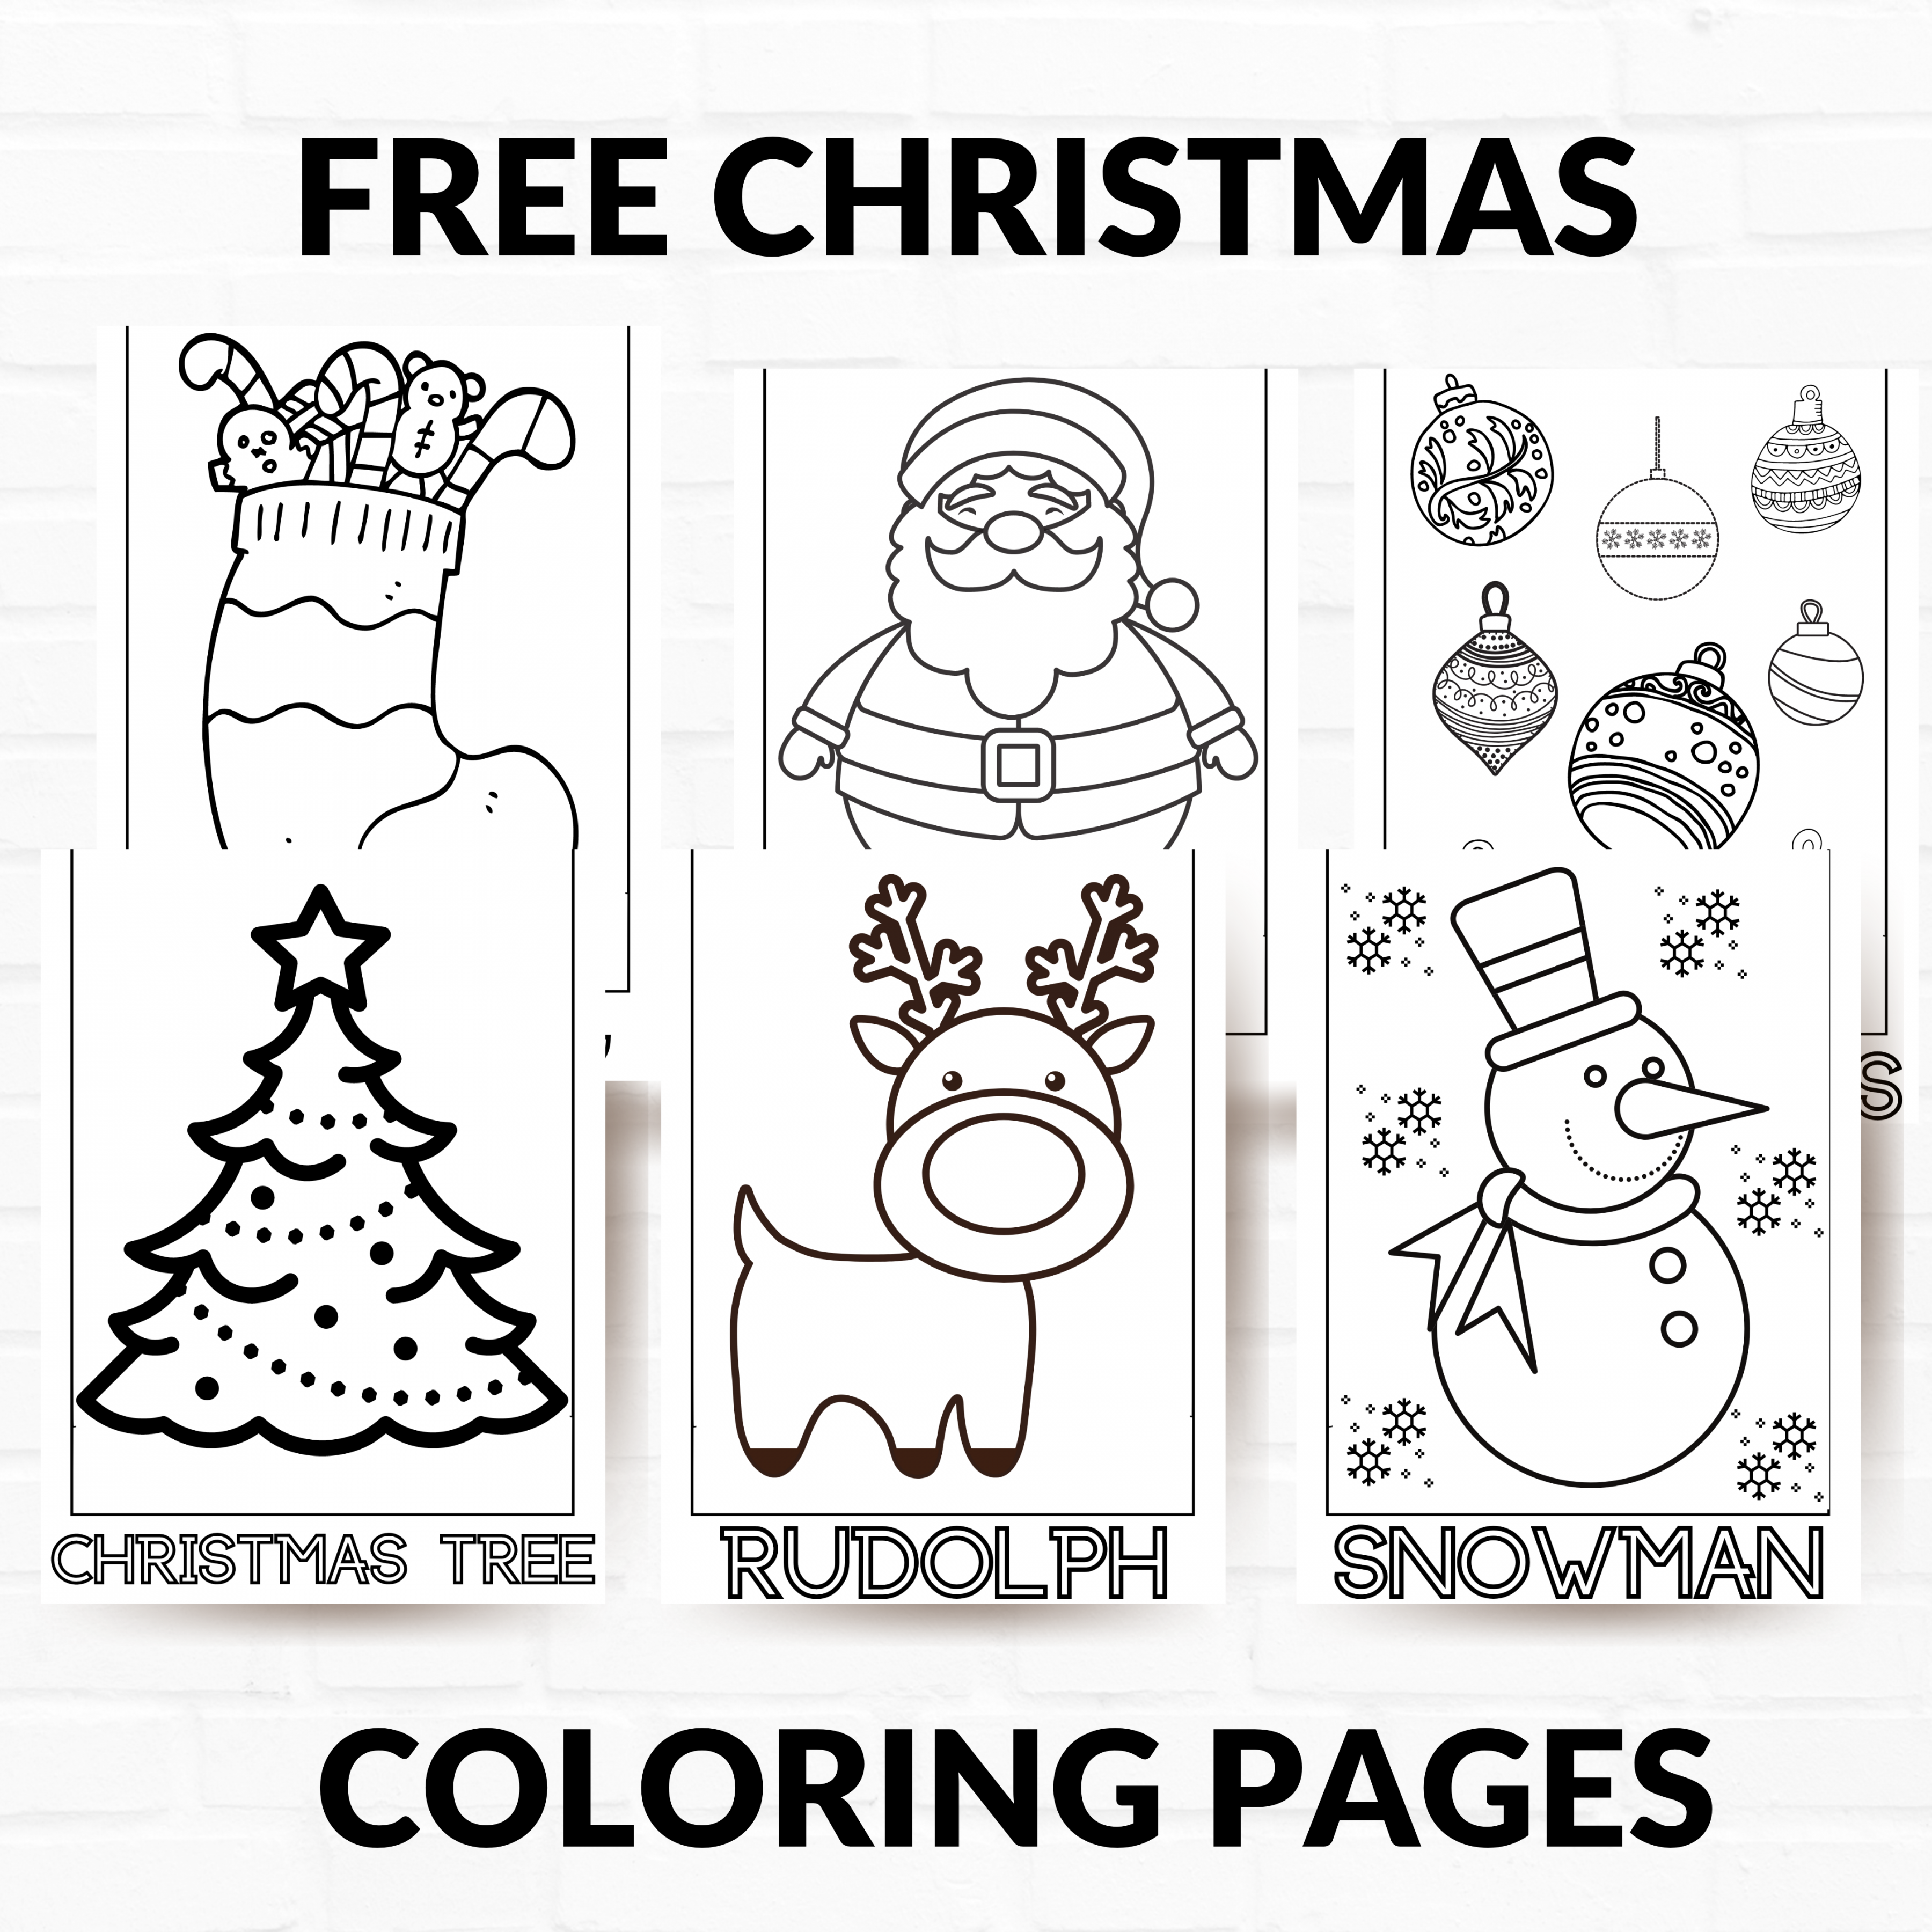 Christmas Coloring Pages Free Printable - Printable - Free Printable Christmas Coloring Pages - About a Mom